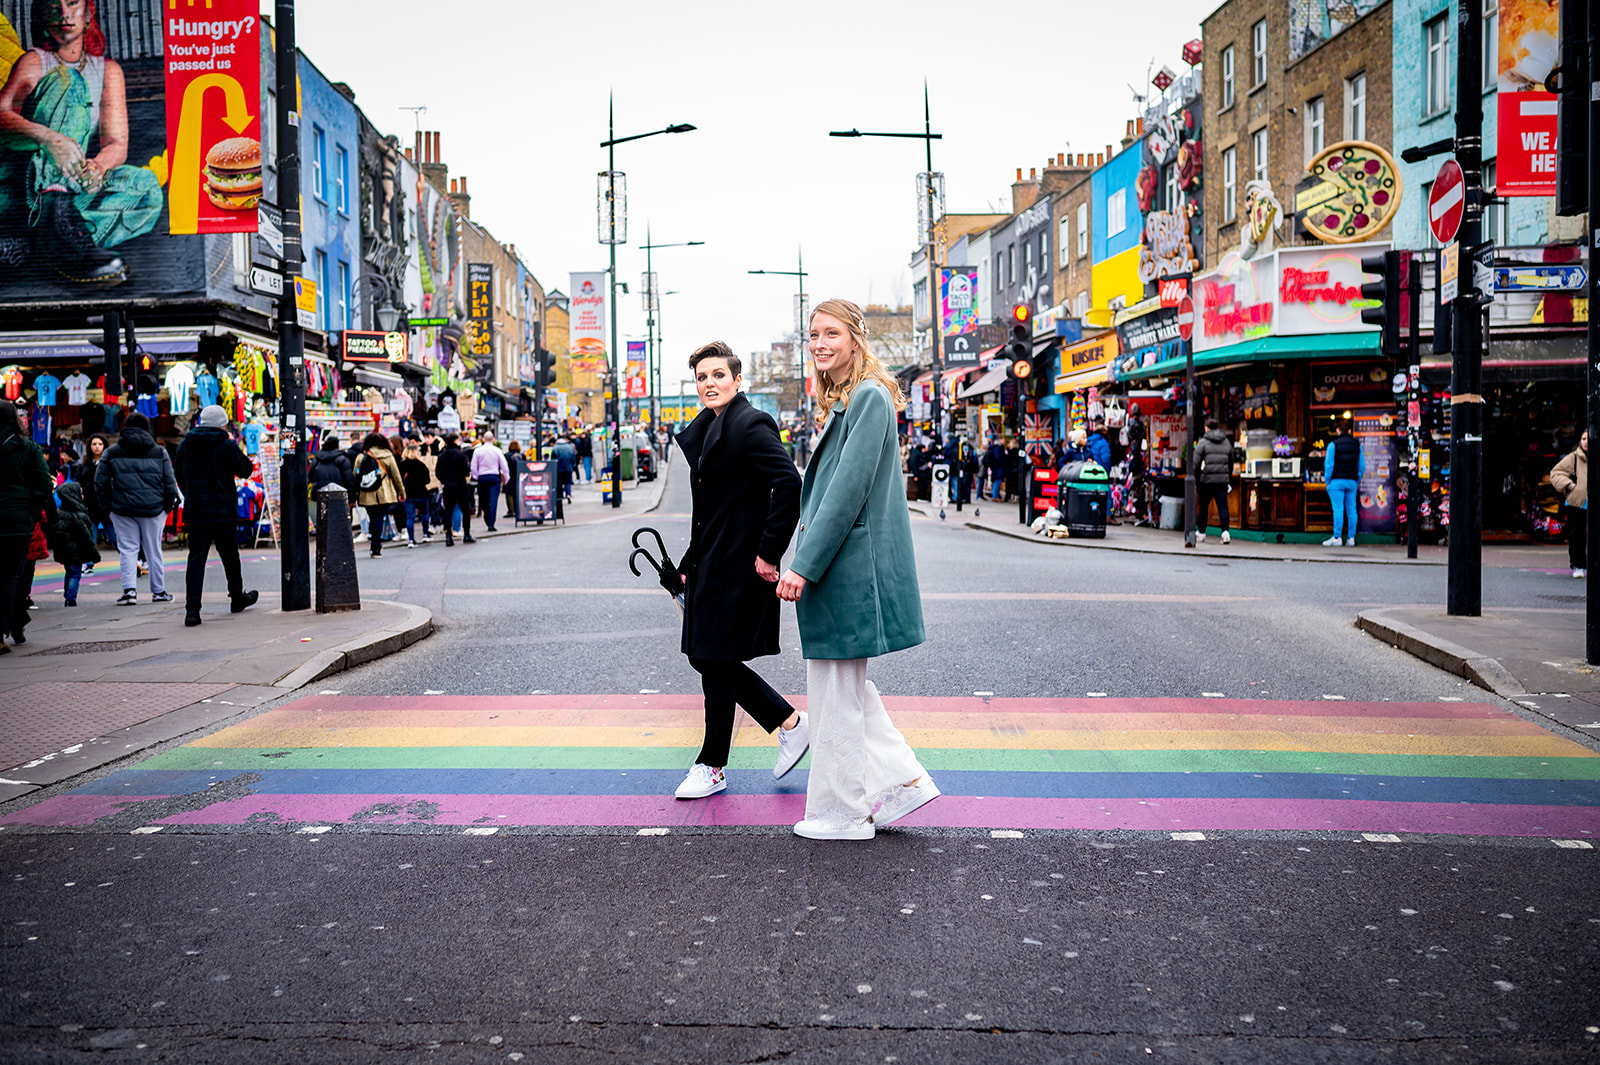 two vibrant brides crossing a Rainbow crossing in Camden